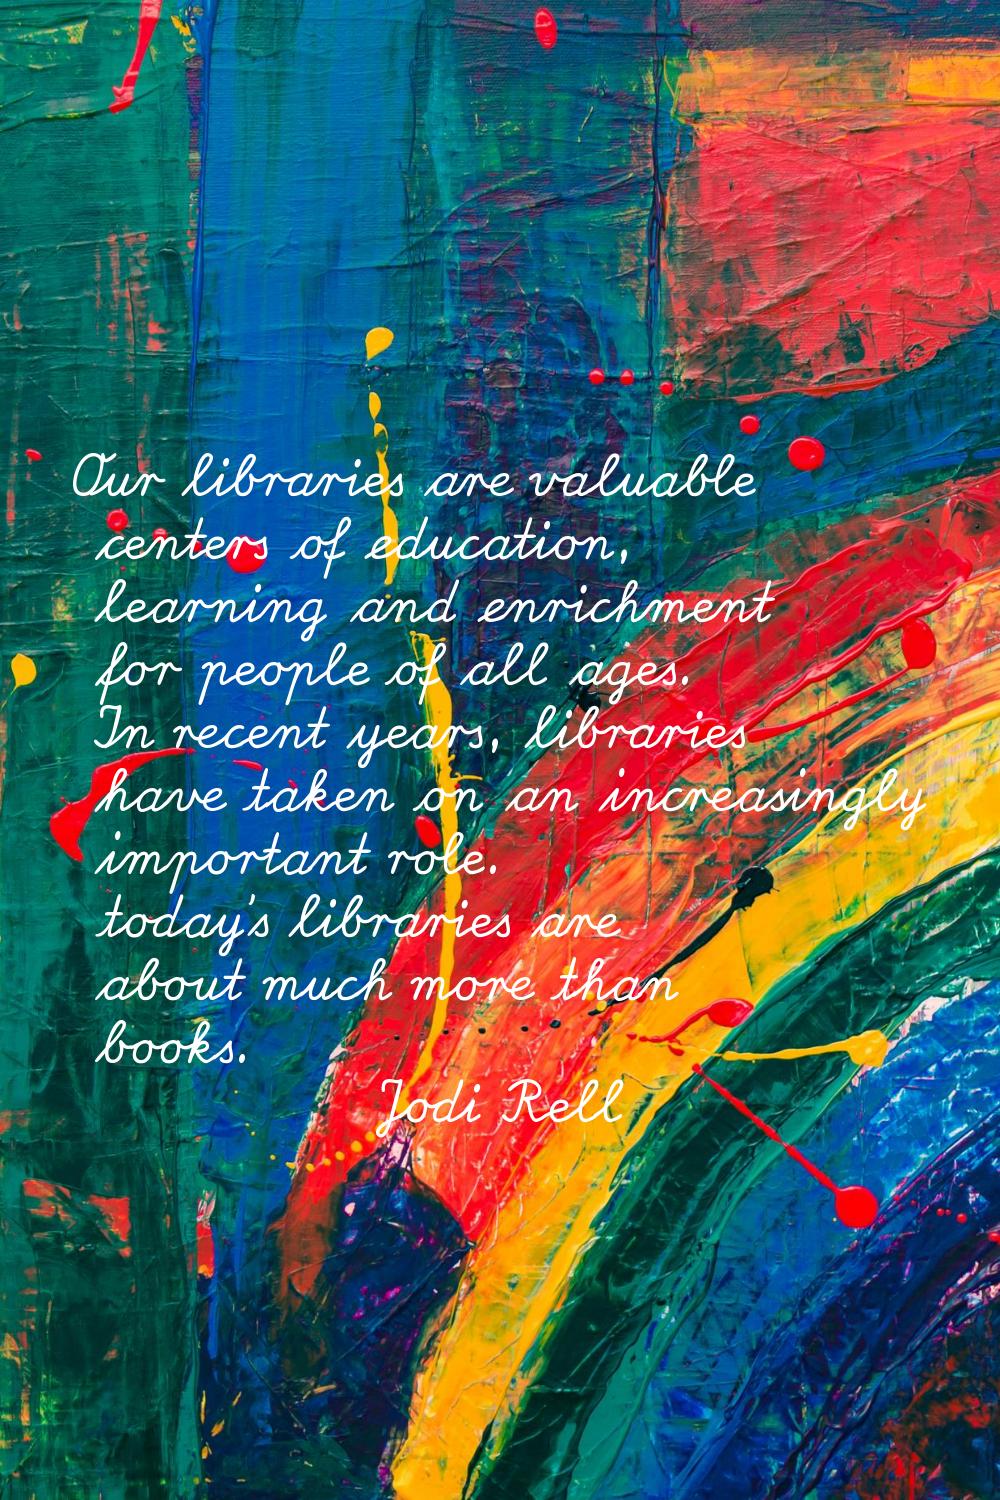 Our libraries are valuable centers of education, learning and enrichment for people of all ages. In